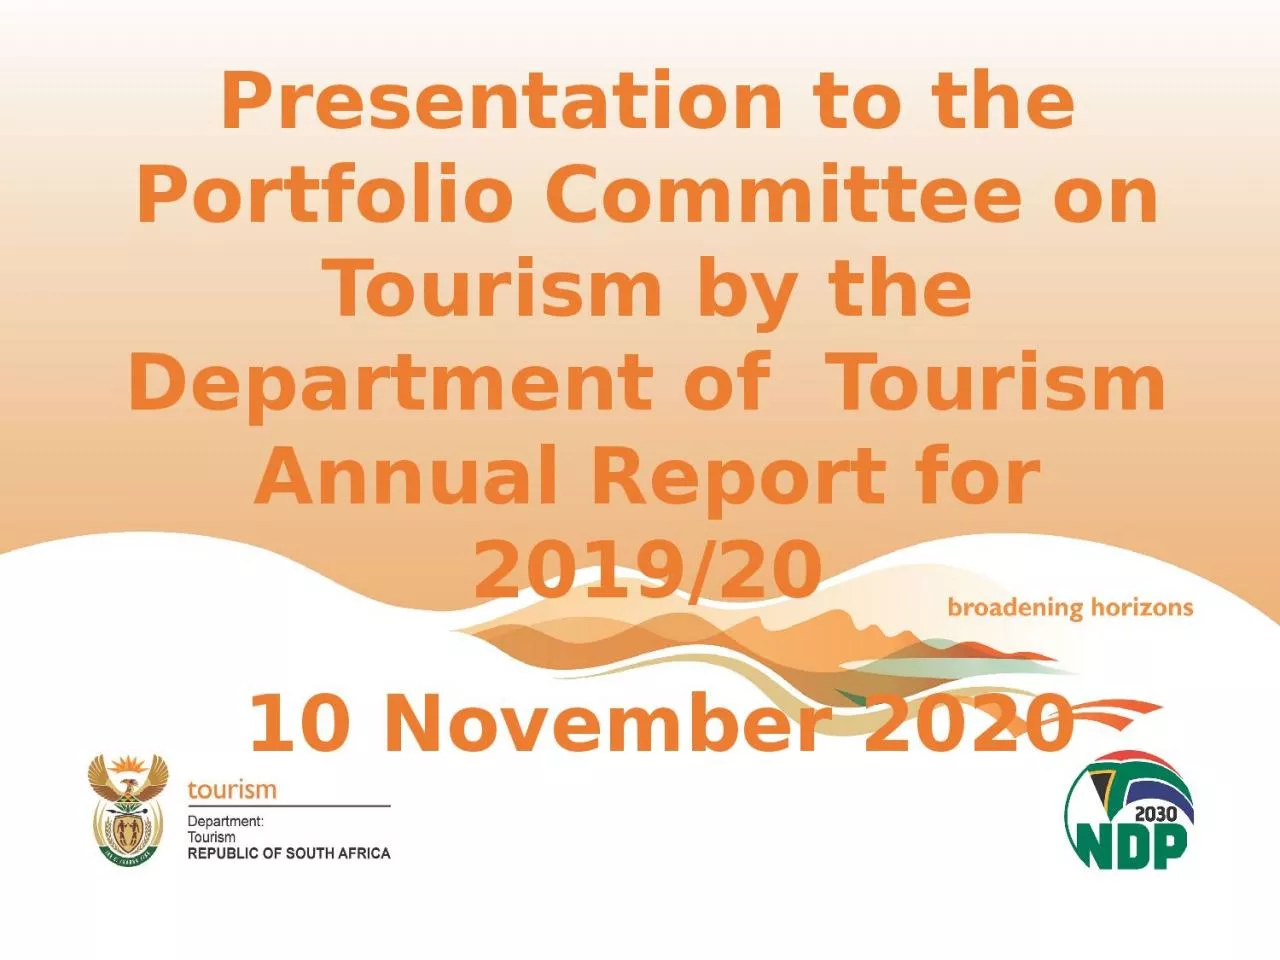 Presentation to the Portfolio Committee on Tourism by the Department